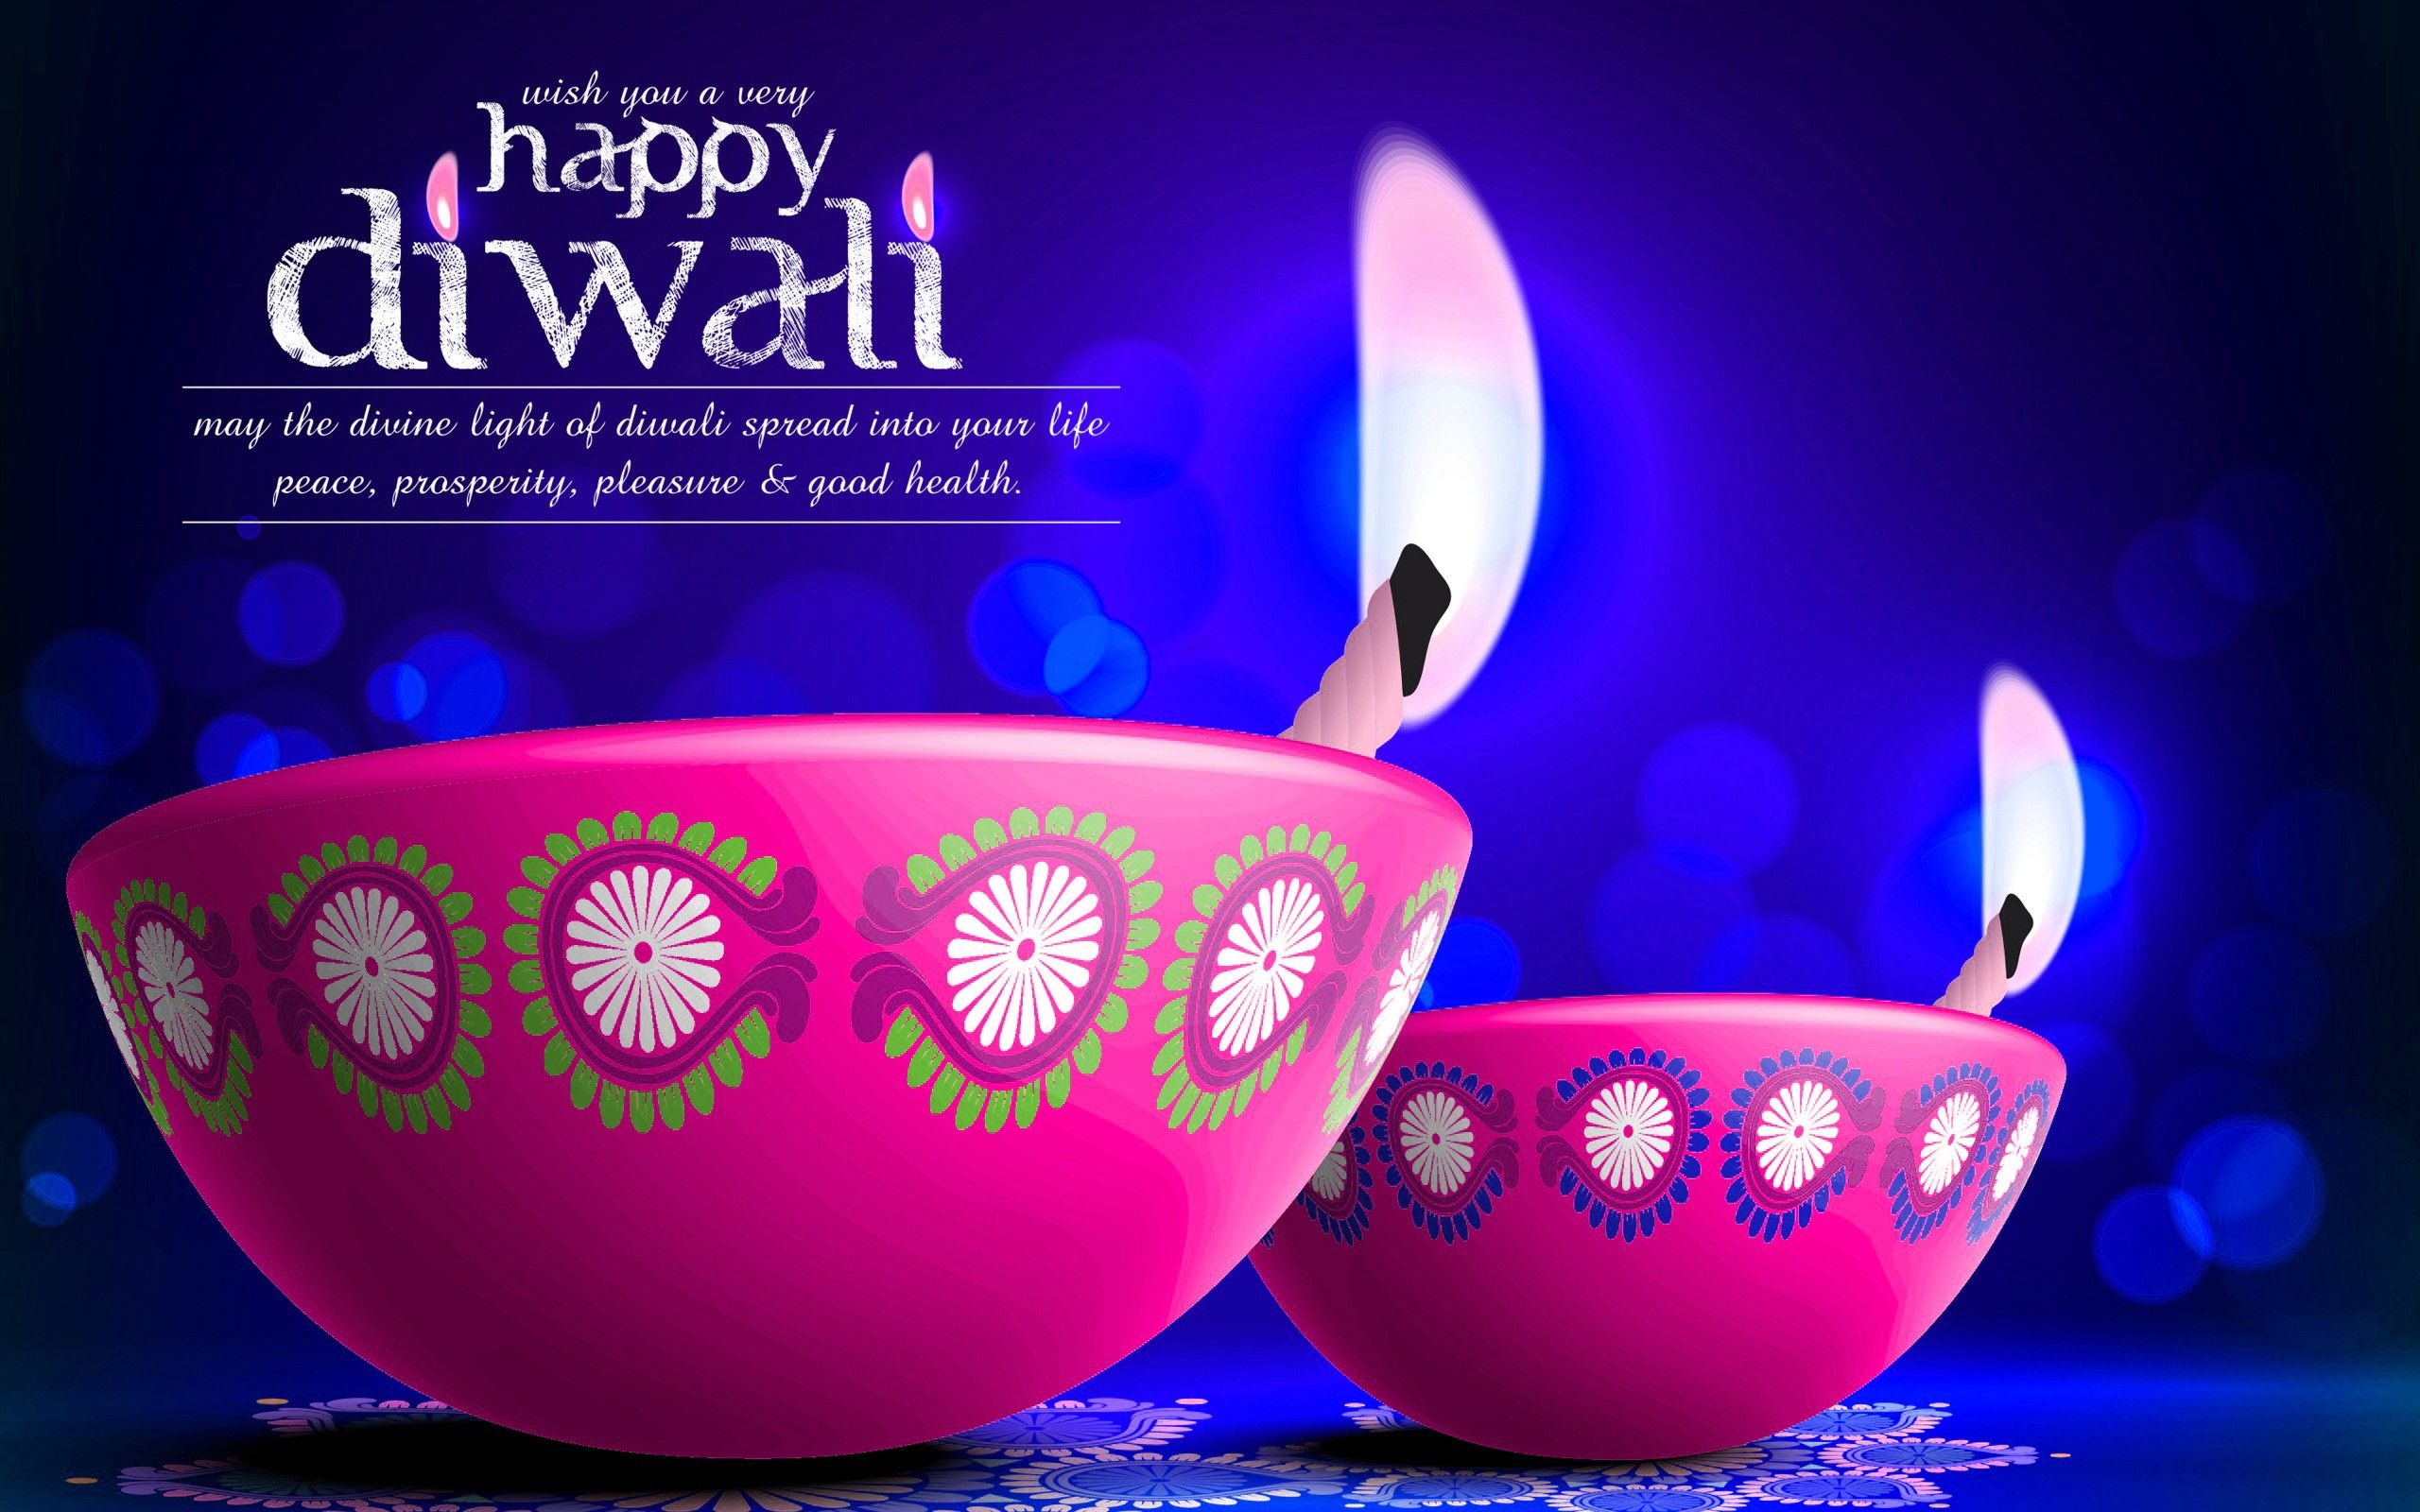 Happy Diwali - , quotes, wishes, SMS, greetings, messages